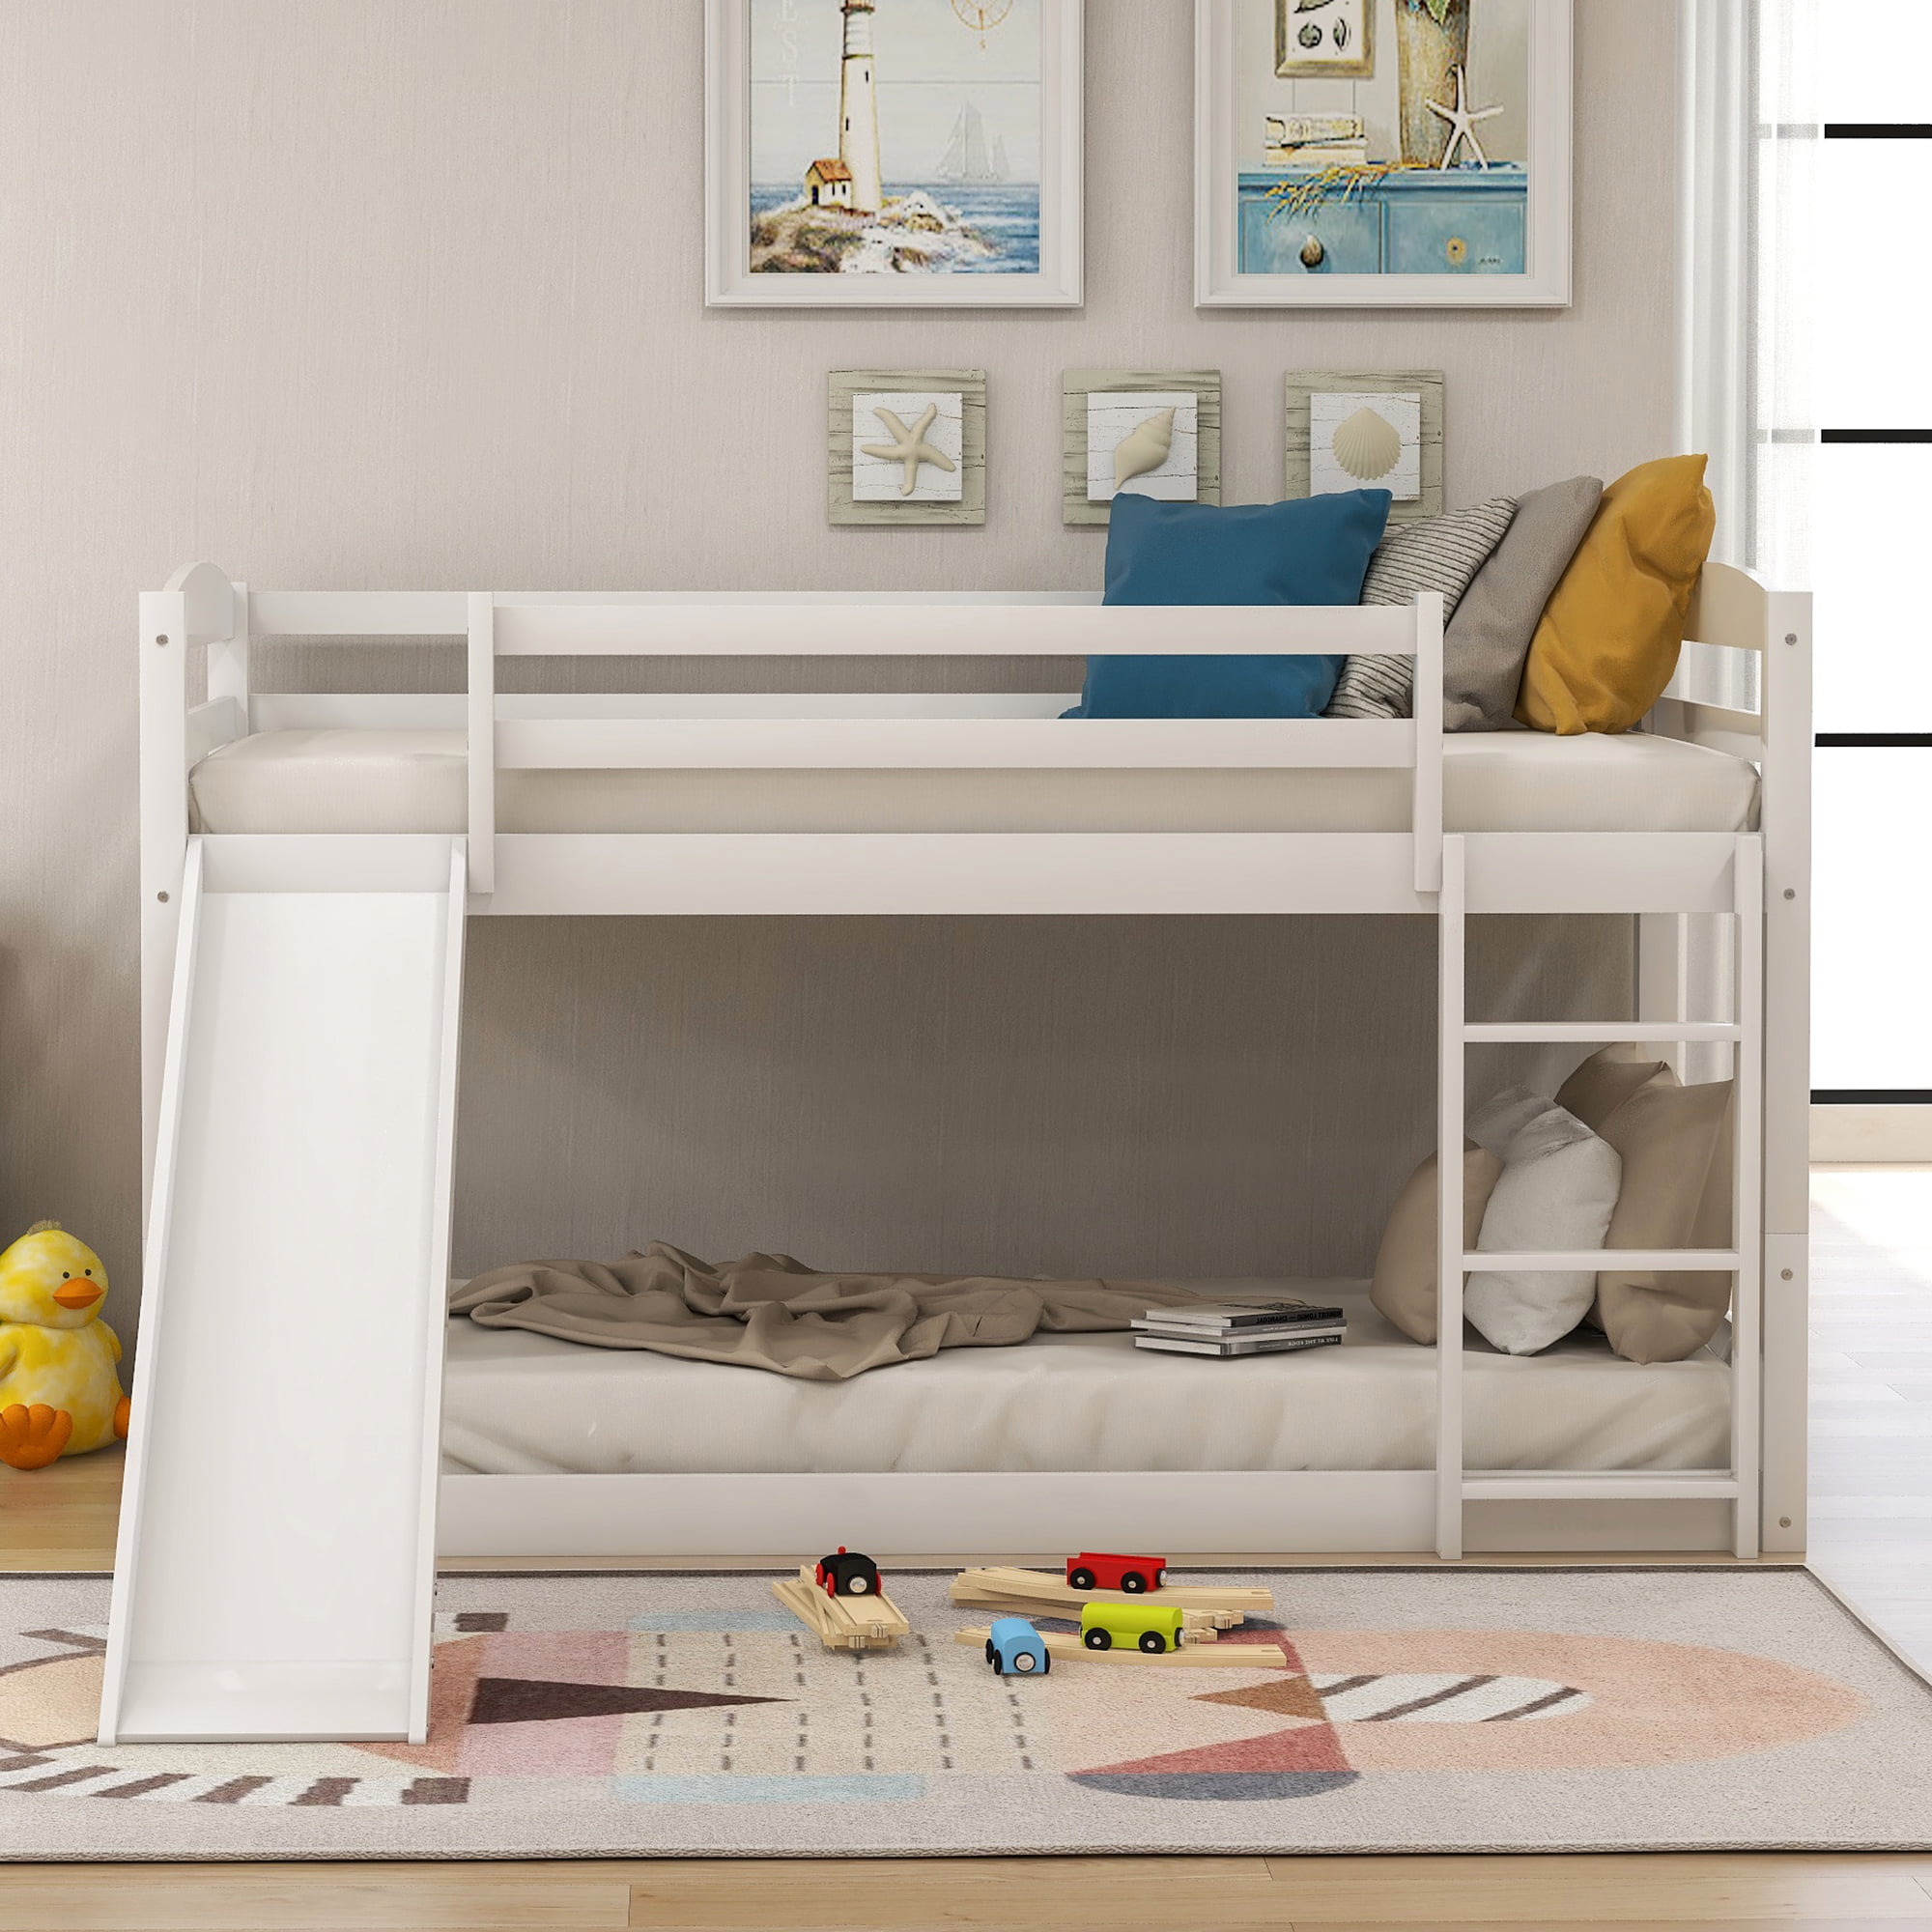 Solid Wood Low Bunk Beds For Kids, Twin Bunk Beds That Can Separate